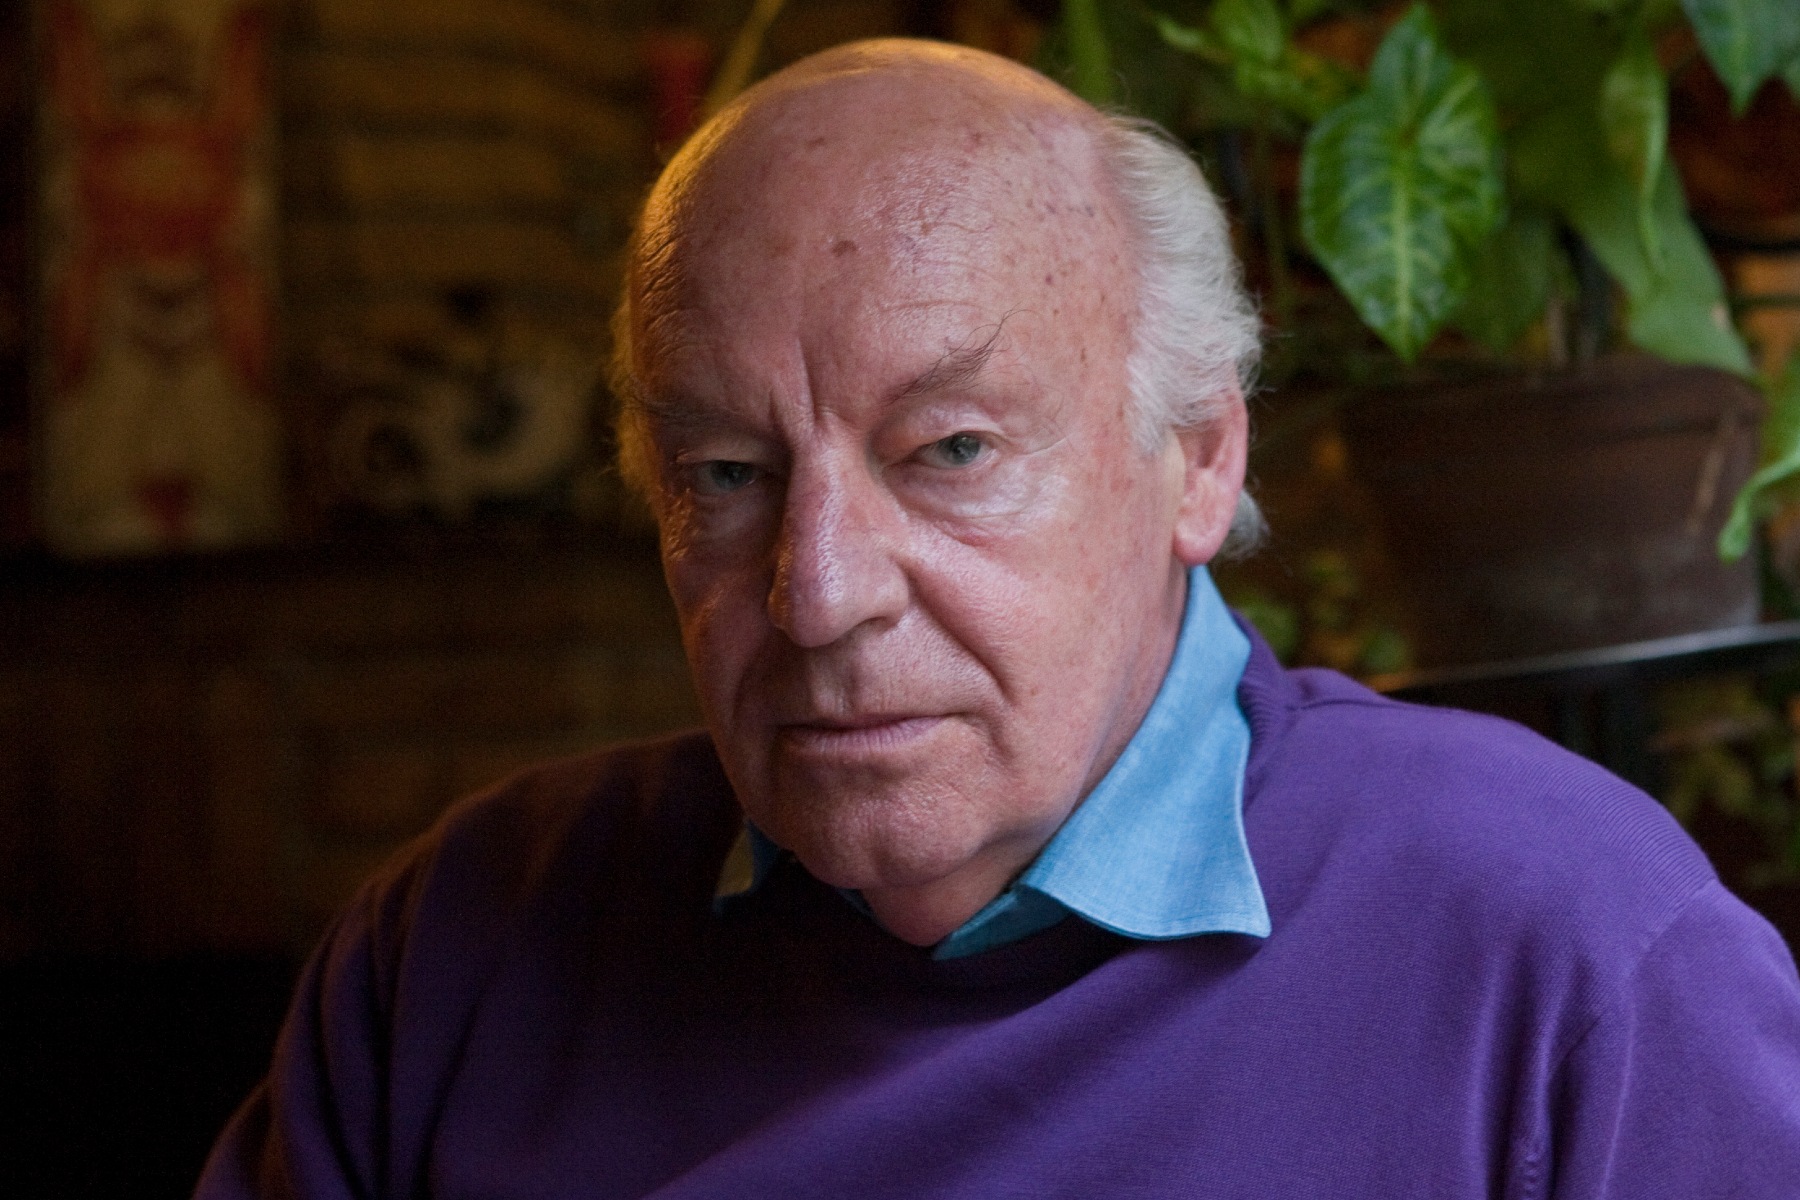 Uruguayan writer, novelist and journalist Eduardo Galeano poses for pictures at his home on May 21, 2010 in Montevideo, Uruguay. Image: Ricardo Ceppi/Getty 